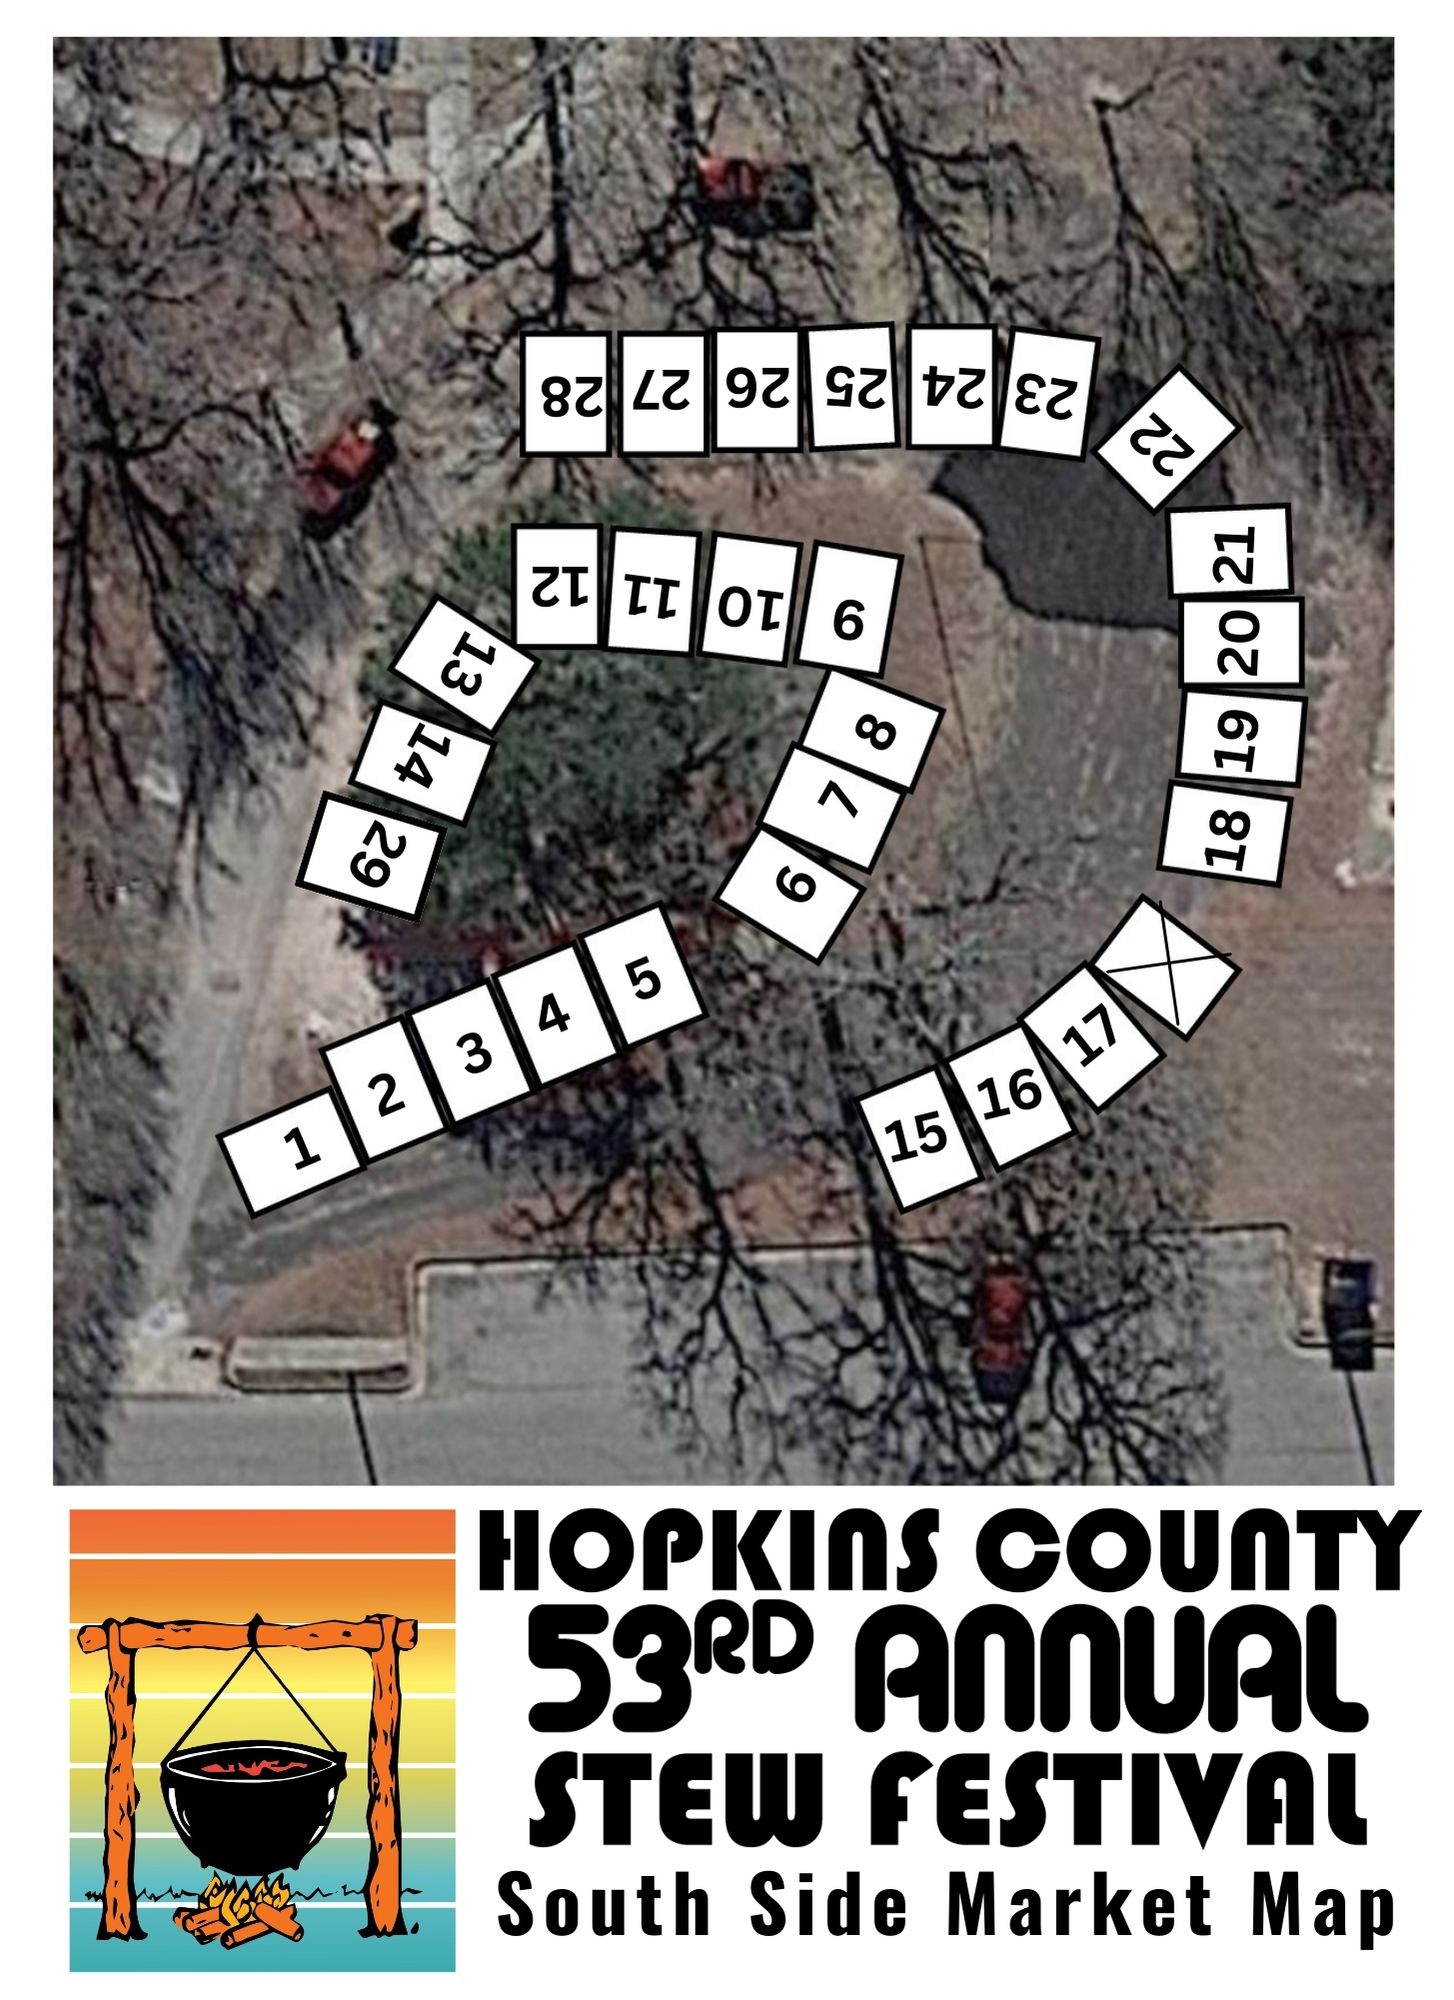 Maps and info for 53rd annual Hopkins County Stew